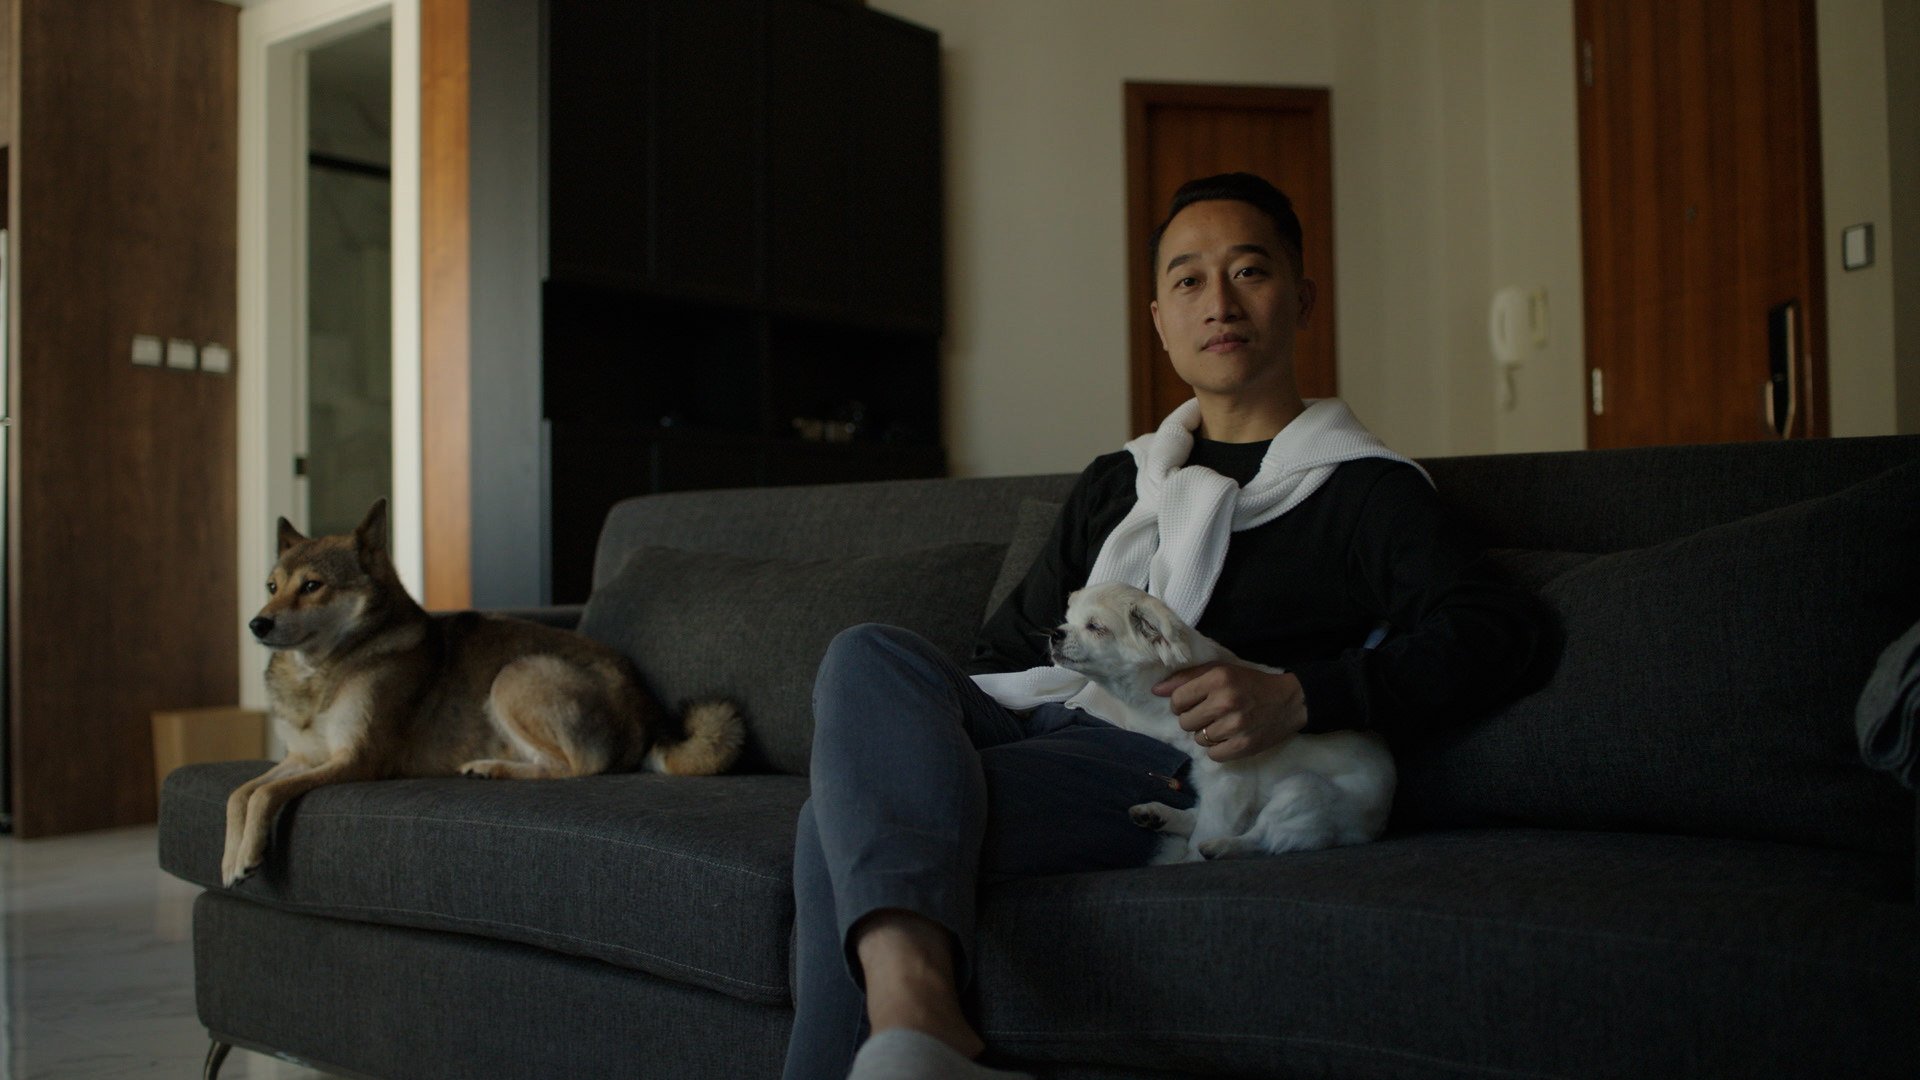 Tommie Lo, the founder and CEO of ed-tech start-up Preface, looks for projects that can make a positive impact, and hopes to find a solution to improve dog welfare.